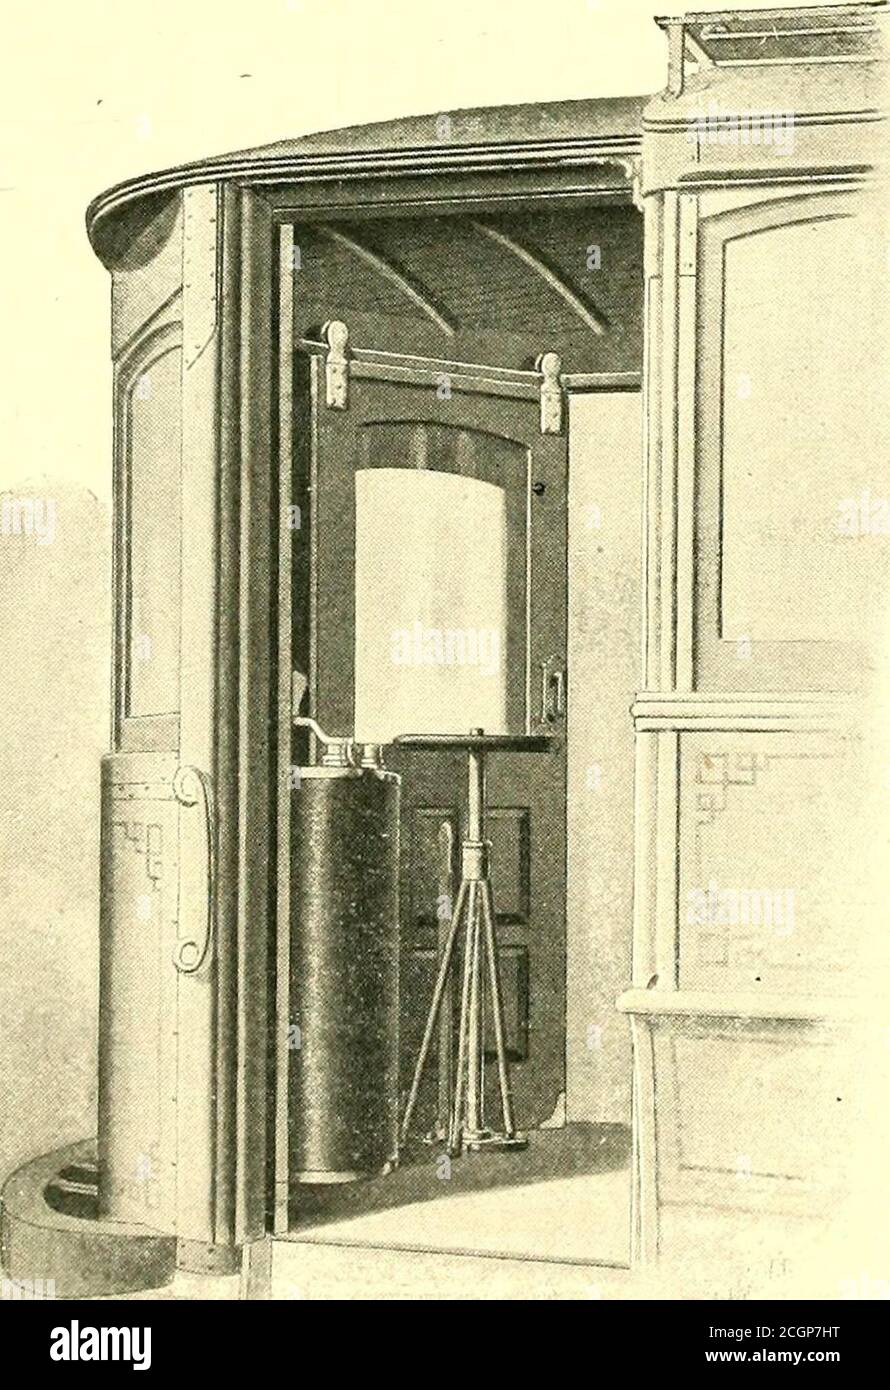 . The Street railway journal . GenuineSteel GEARS -A-hie: the most ^tj^^bijE: MANUFACTURED BY HORSBURGH St SCOTT, Cleueland. Ohio.— —*P /G/RDS ft— Patent Vestibule Sliding Door Fixture. Door Hung on Swivel Hangers, follows angle of Vestibule;requires least possible space.Manufactured Exclusively by JAMES L. HOWARD & CO. Hartford, Conn. Goods Well Extolled are Half Sold Are the merits of your wares placedbefore the intending purchaser in anattractive and interesting fashion ? Youlose his trade unless they are. . 0 We Design, Write and Print Catalogues, Descriptive Pamph= ♦lets and all other E Stock Photo